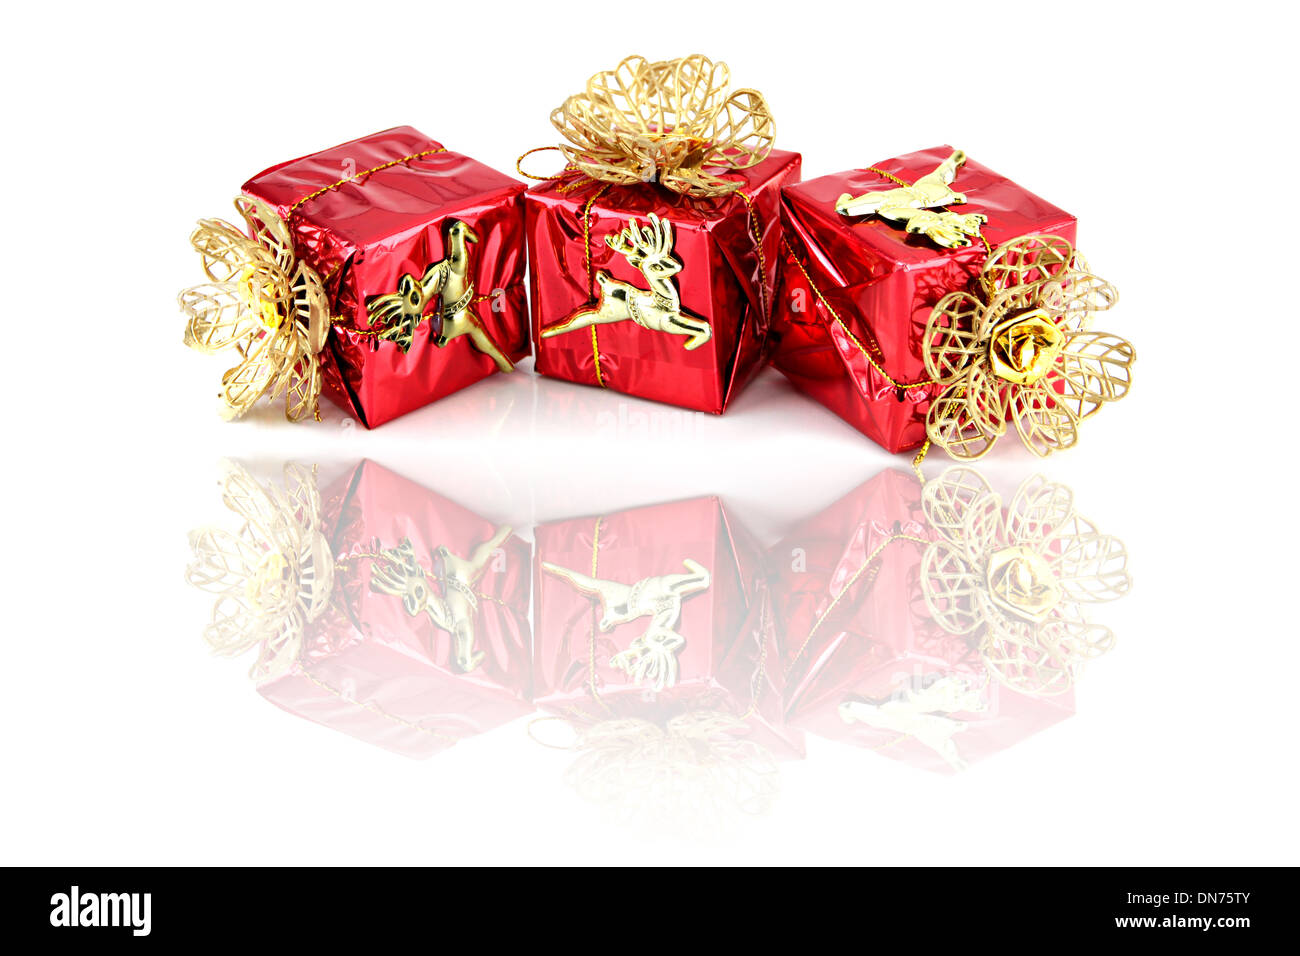 Red gift box and gold Reindeer have Reflections on white background. Stock Photo